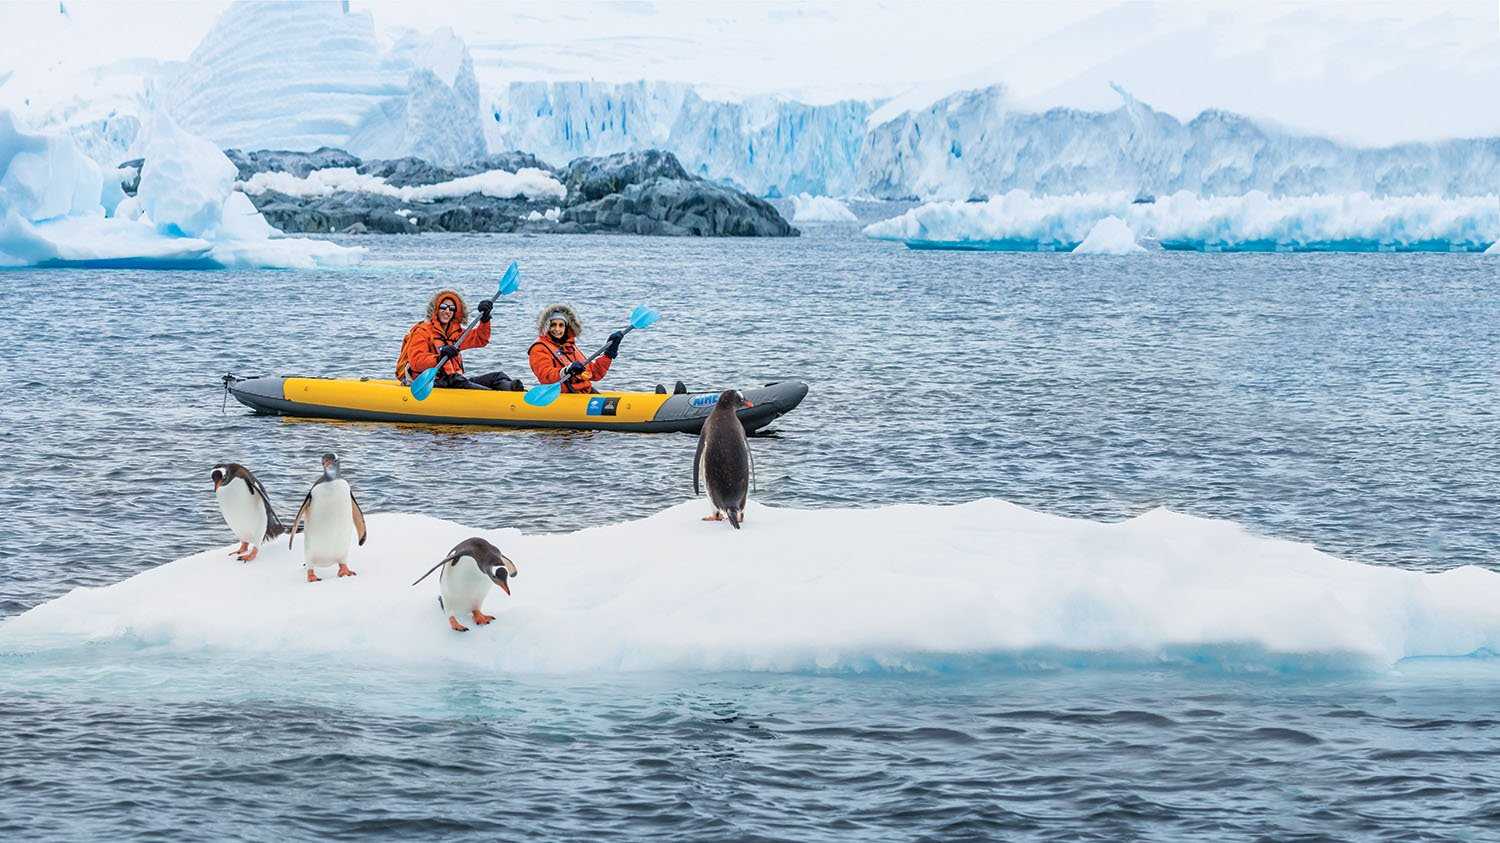 Guests spot penguins as they Kayak in the blue waters of Antarctica.